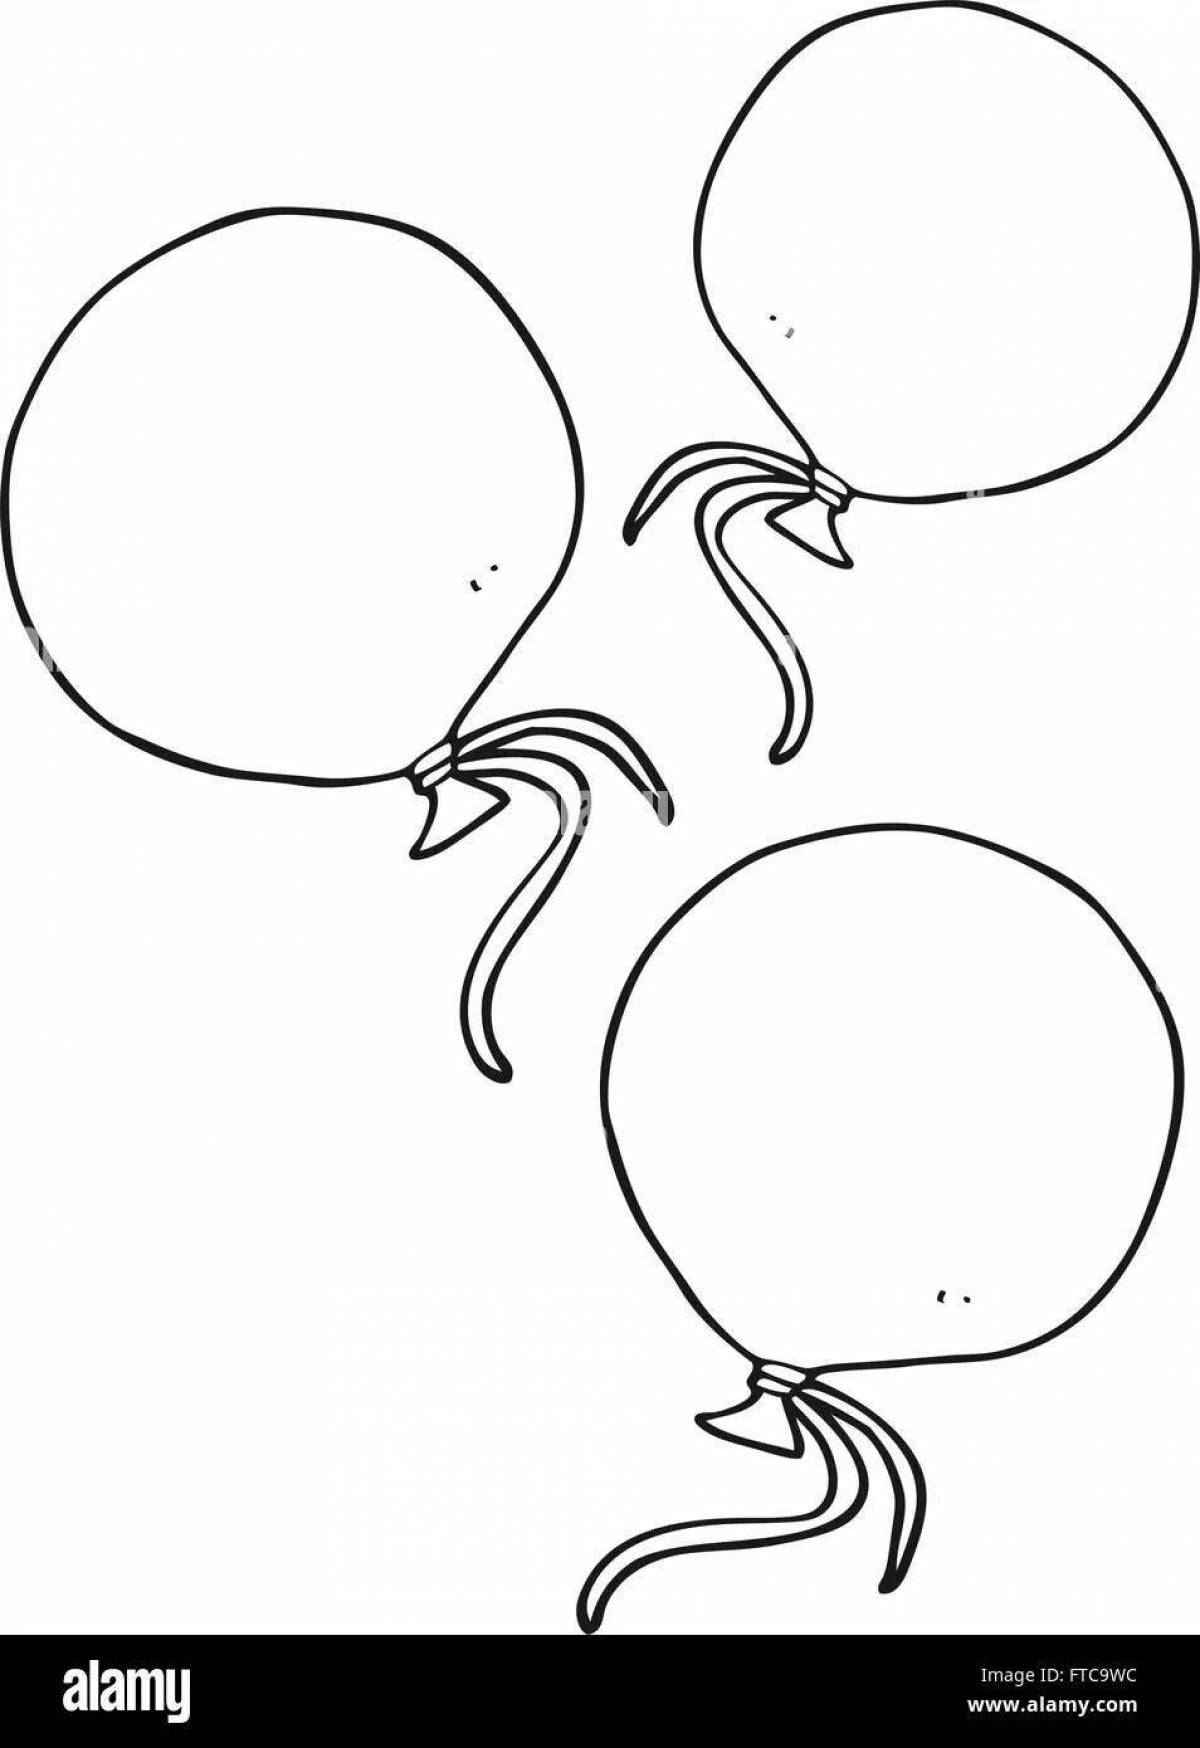 Colored explosive balloons coloring book for 3-4 year olds